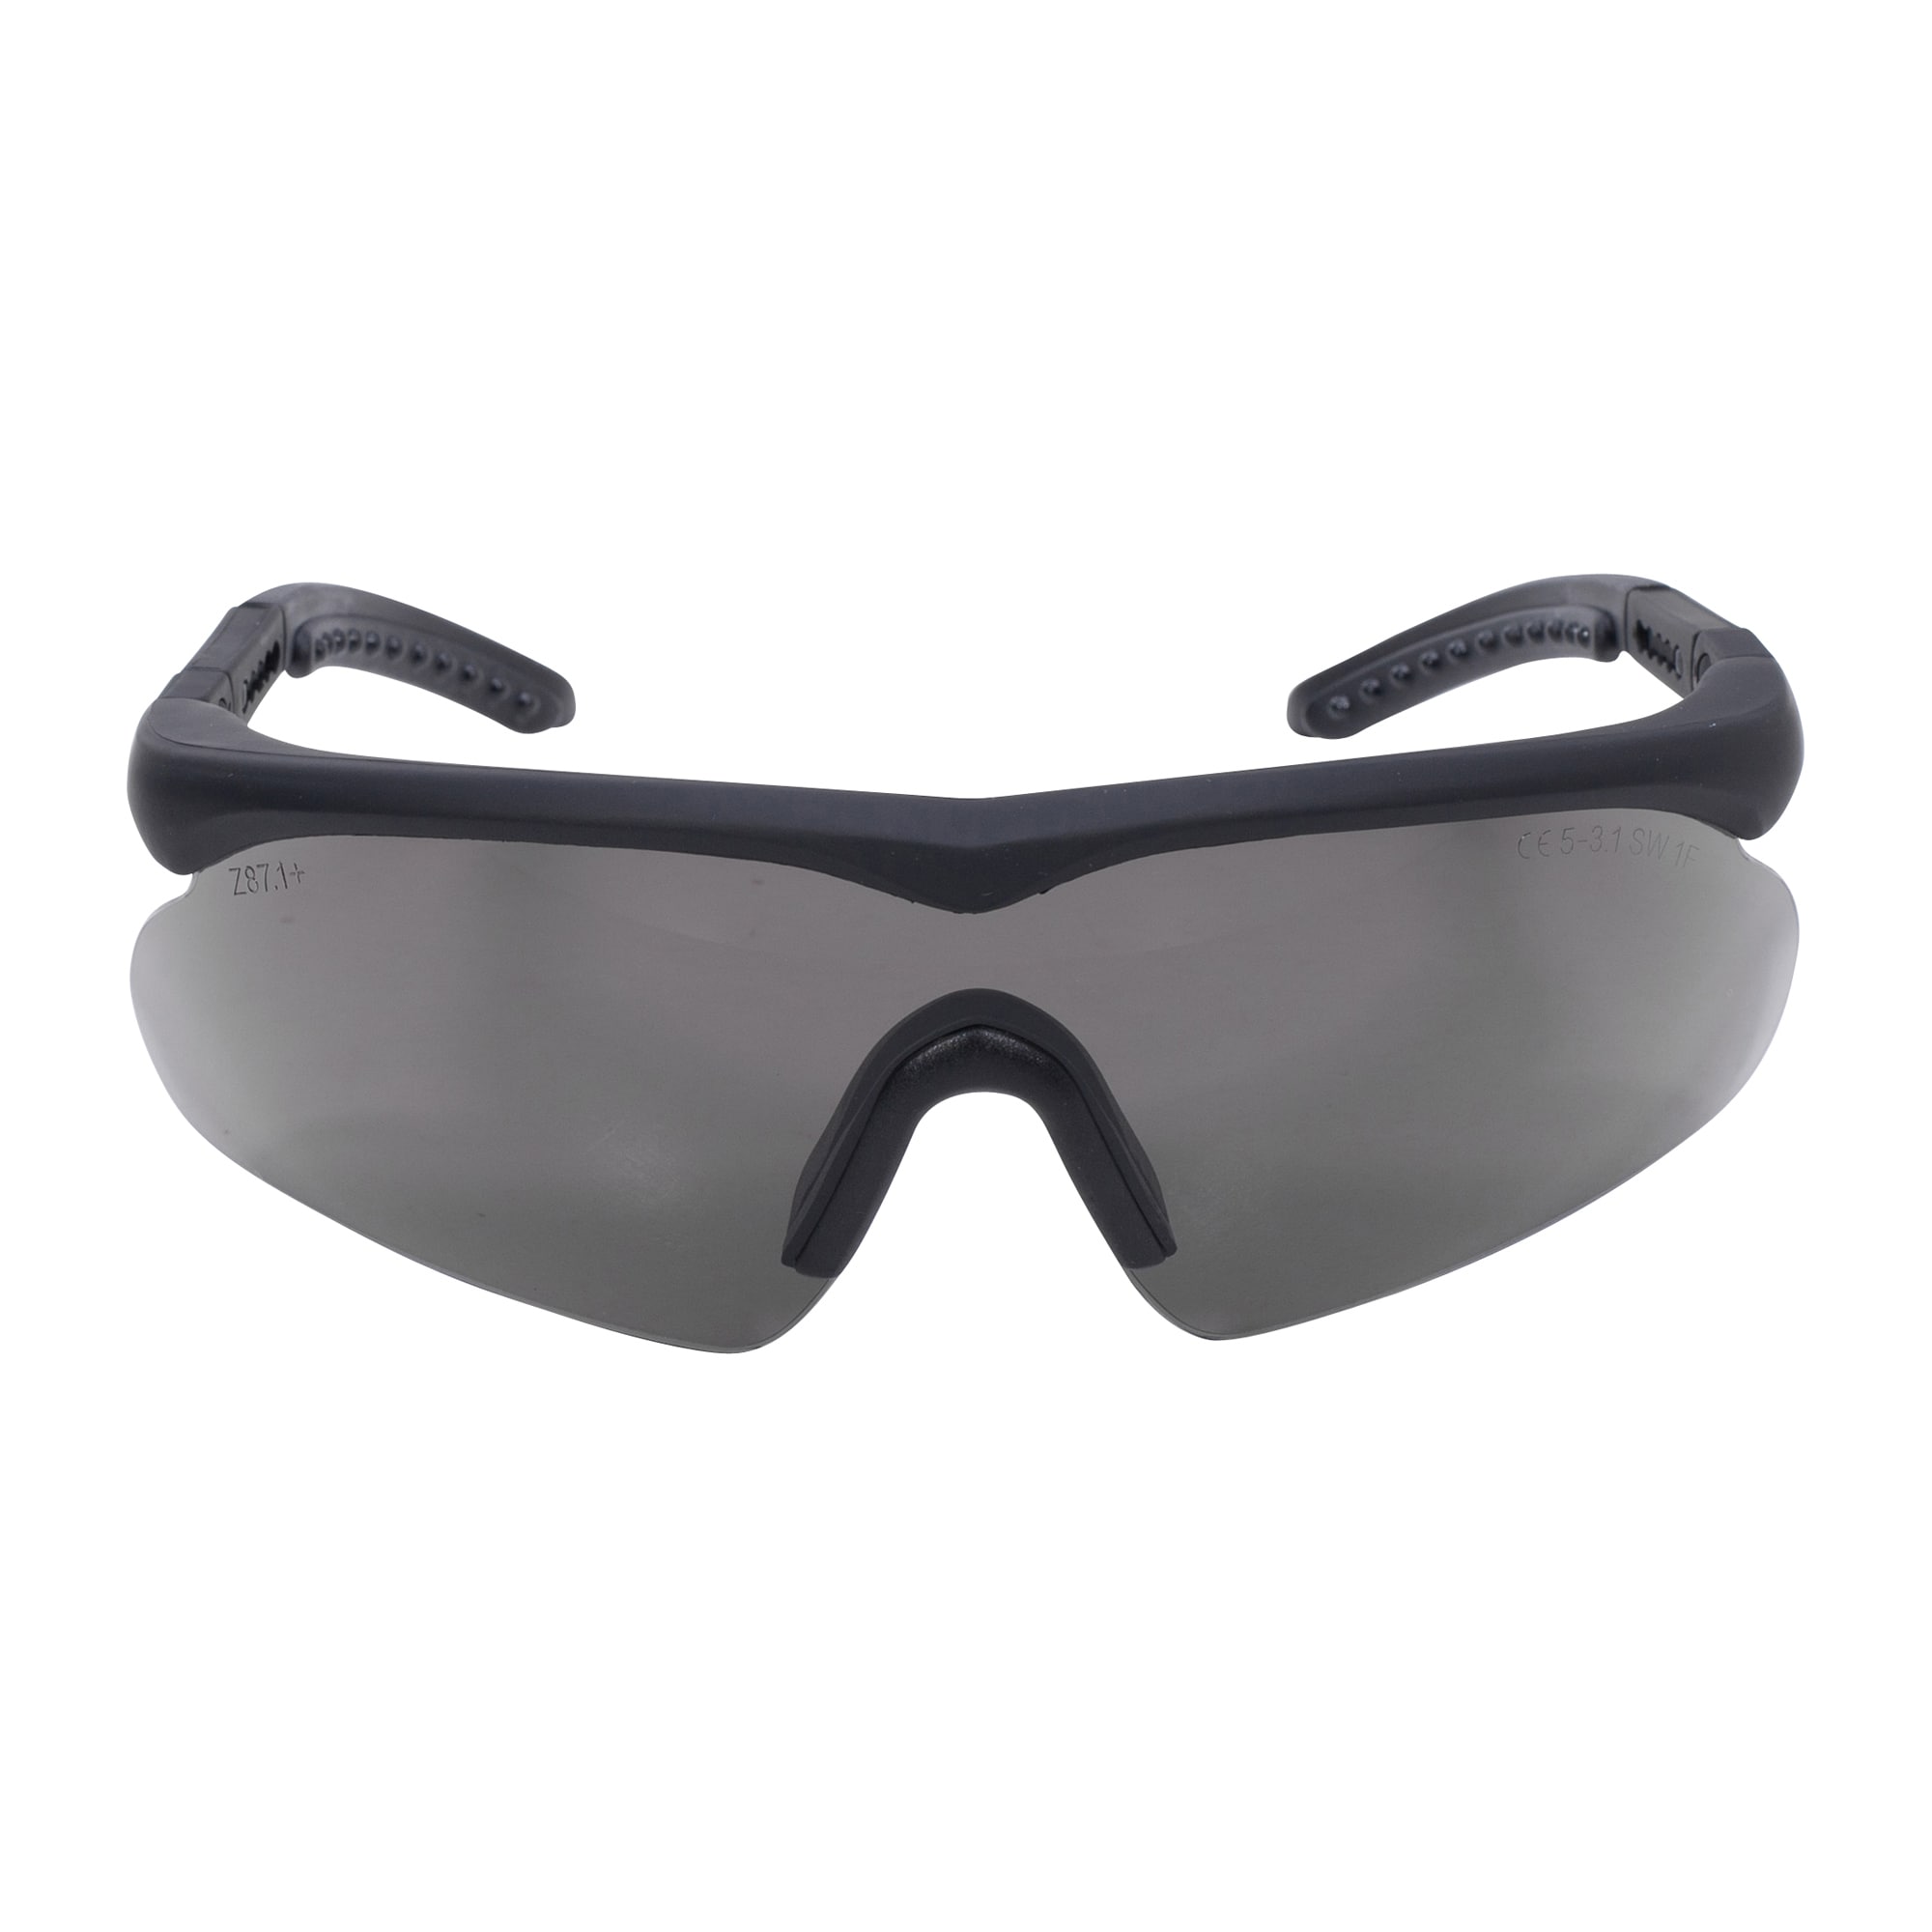 Purchase the Swiss Eye Safety Glasses Raptor black by ASMC